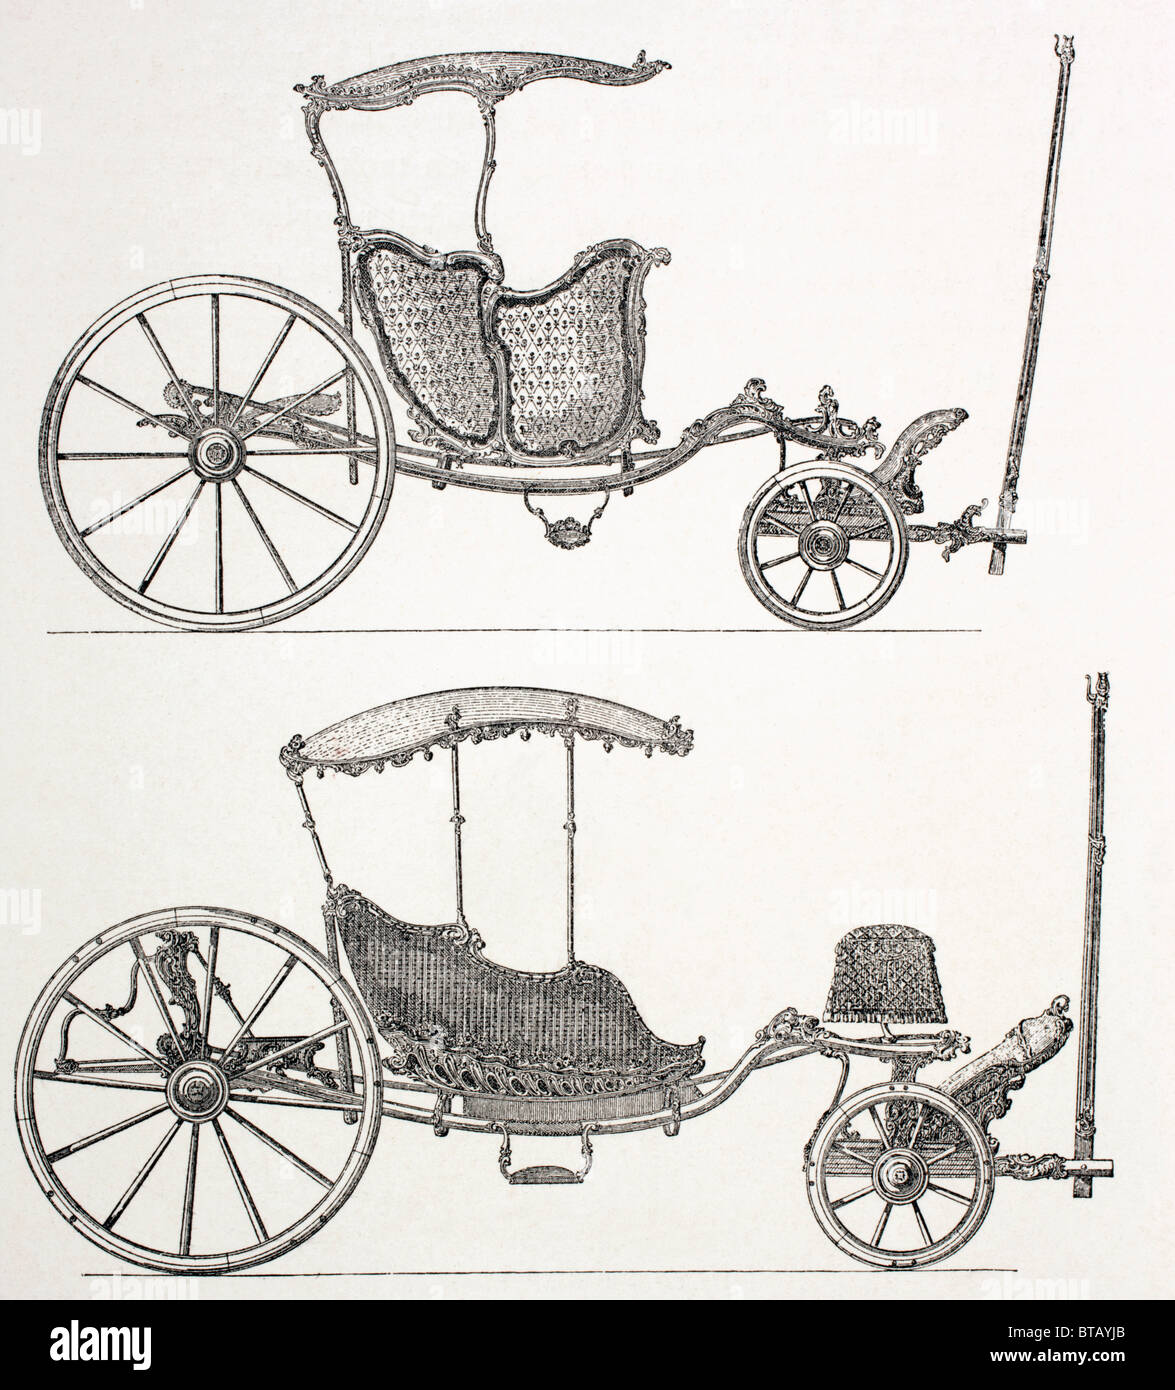 18th century French carriages. Stock Photo